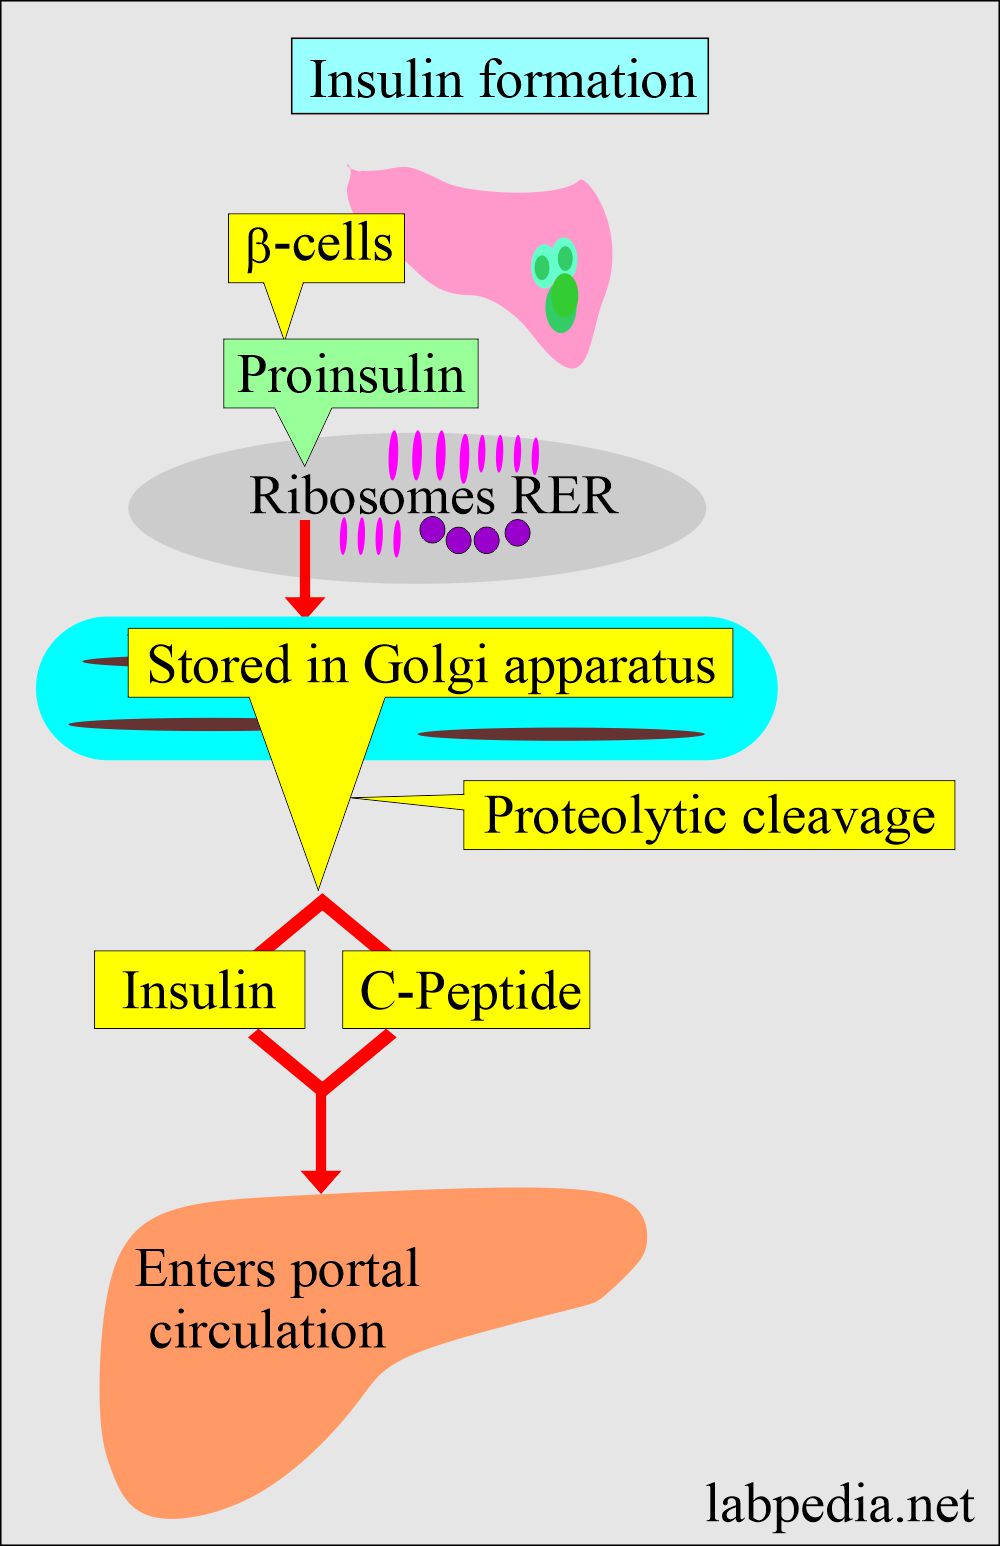 Pancreatic functions: Insulin formation